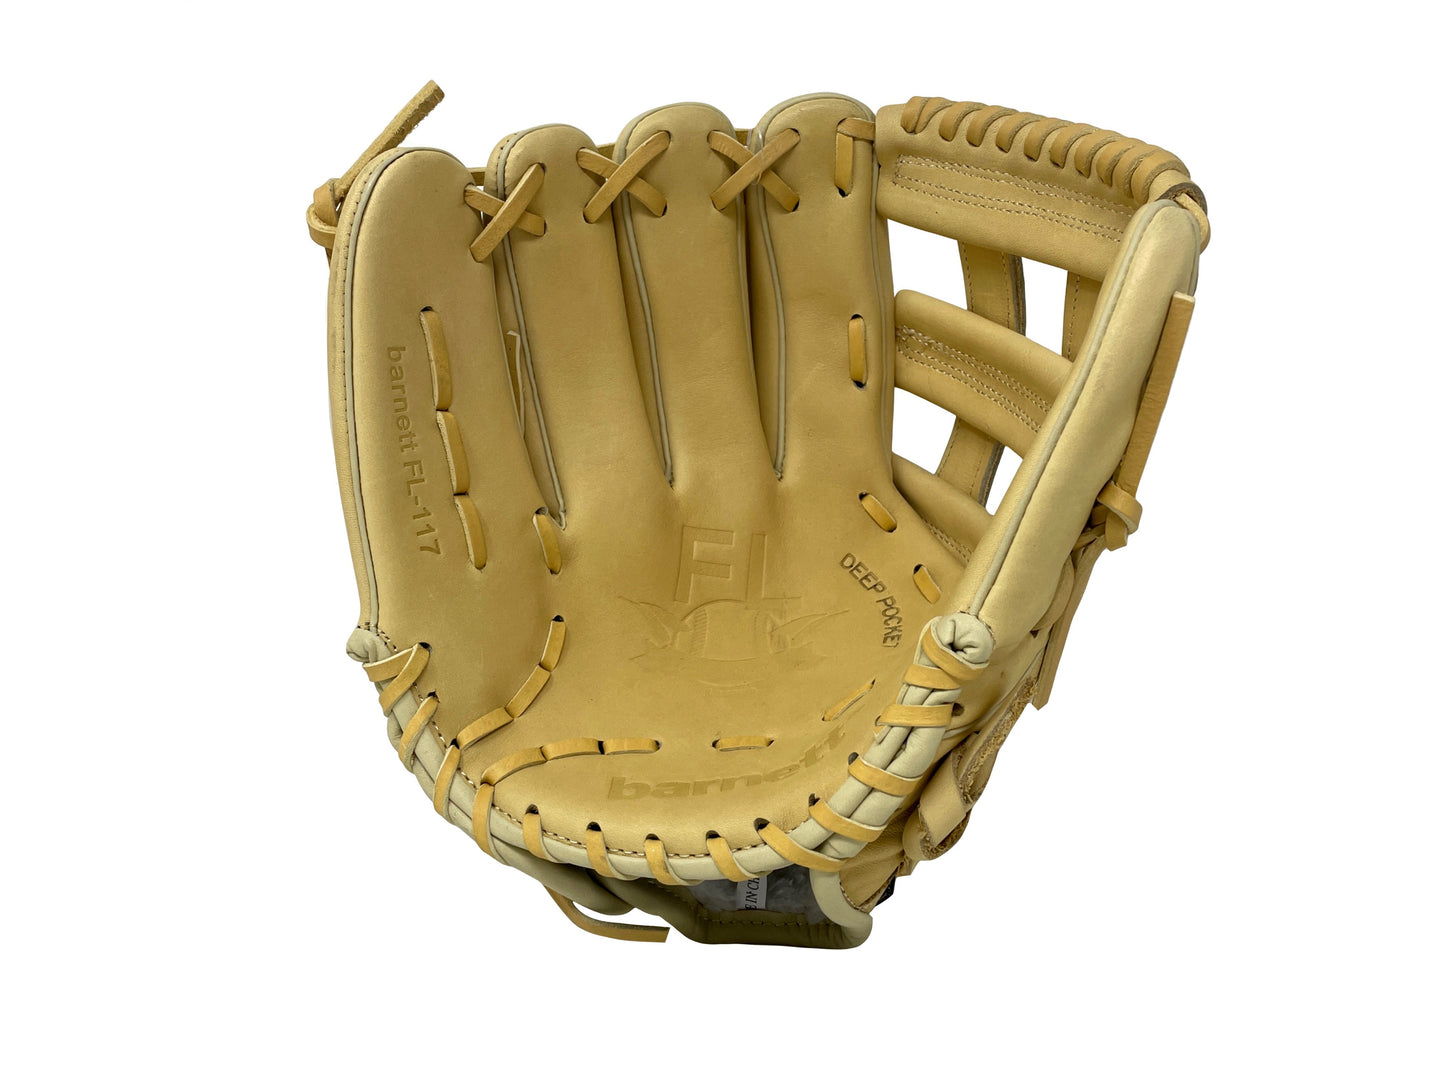 FL-117 Baseball and softball glove, leather, infield / fastpitch 11.7", Beige